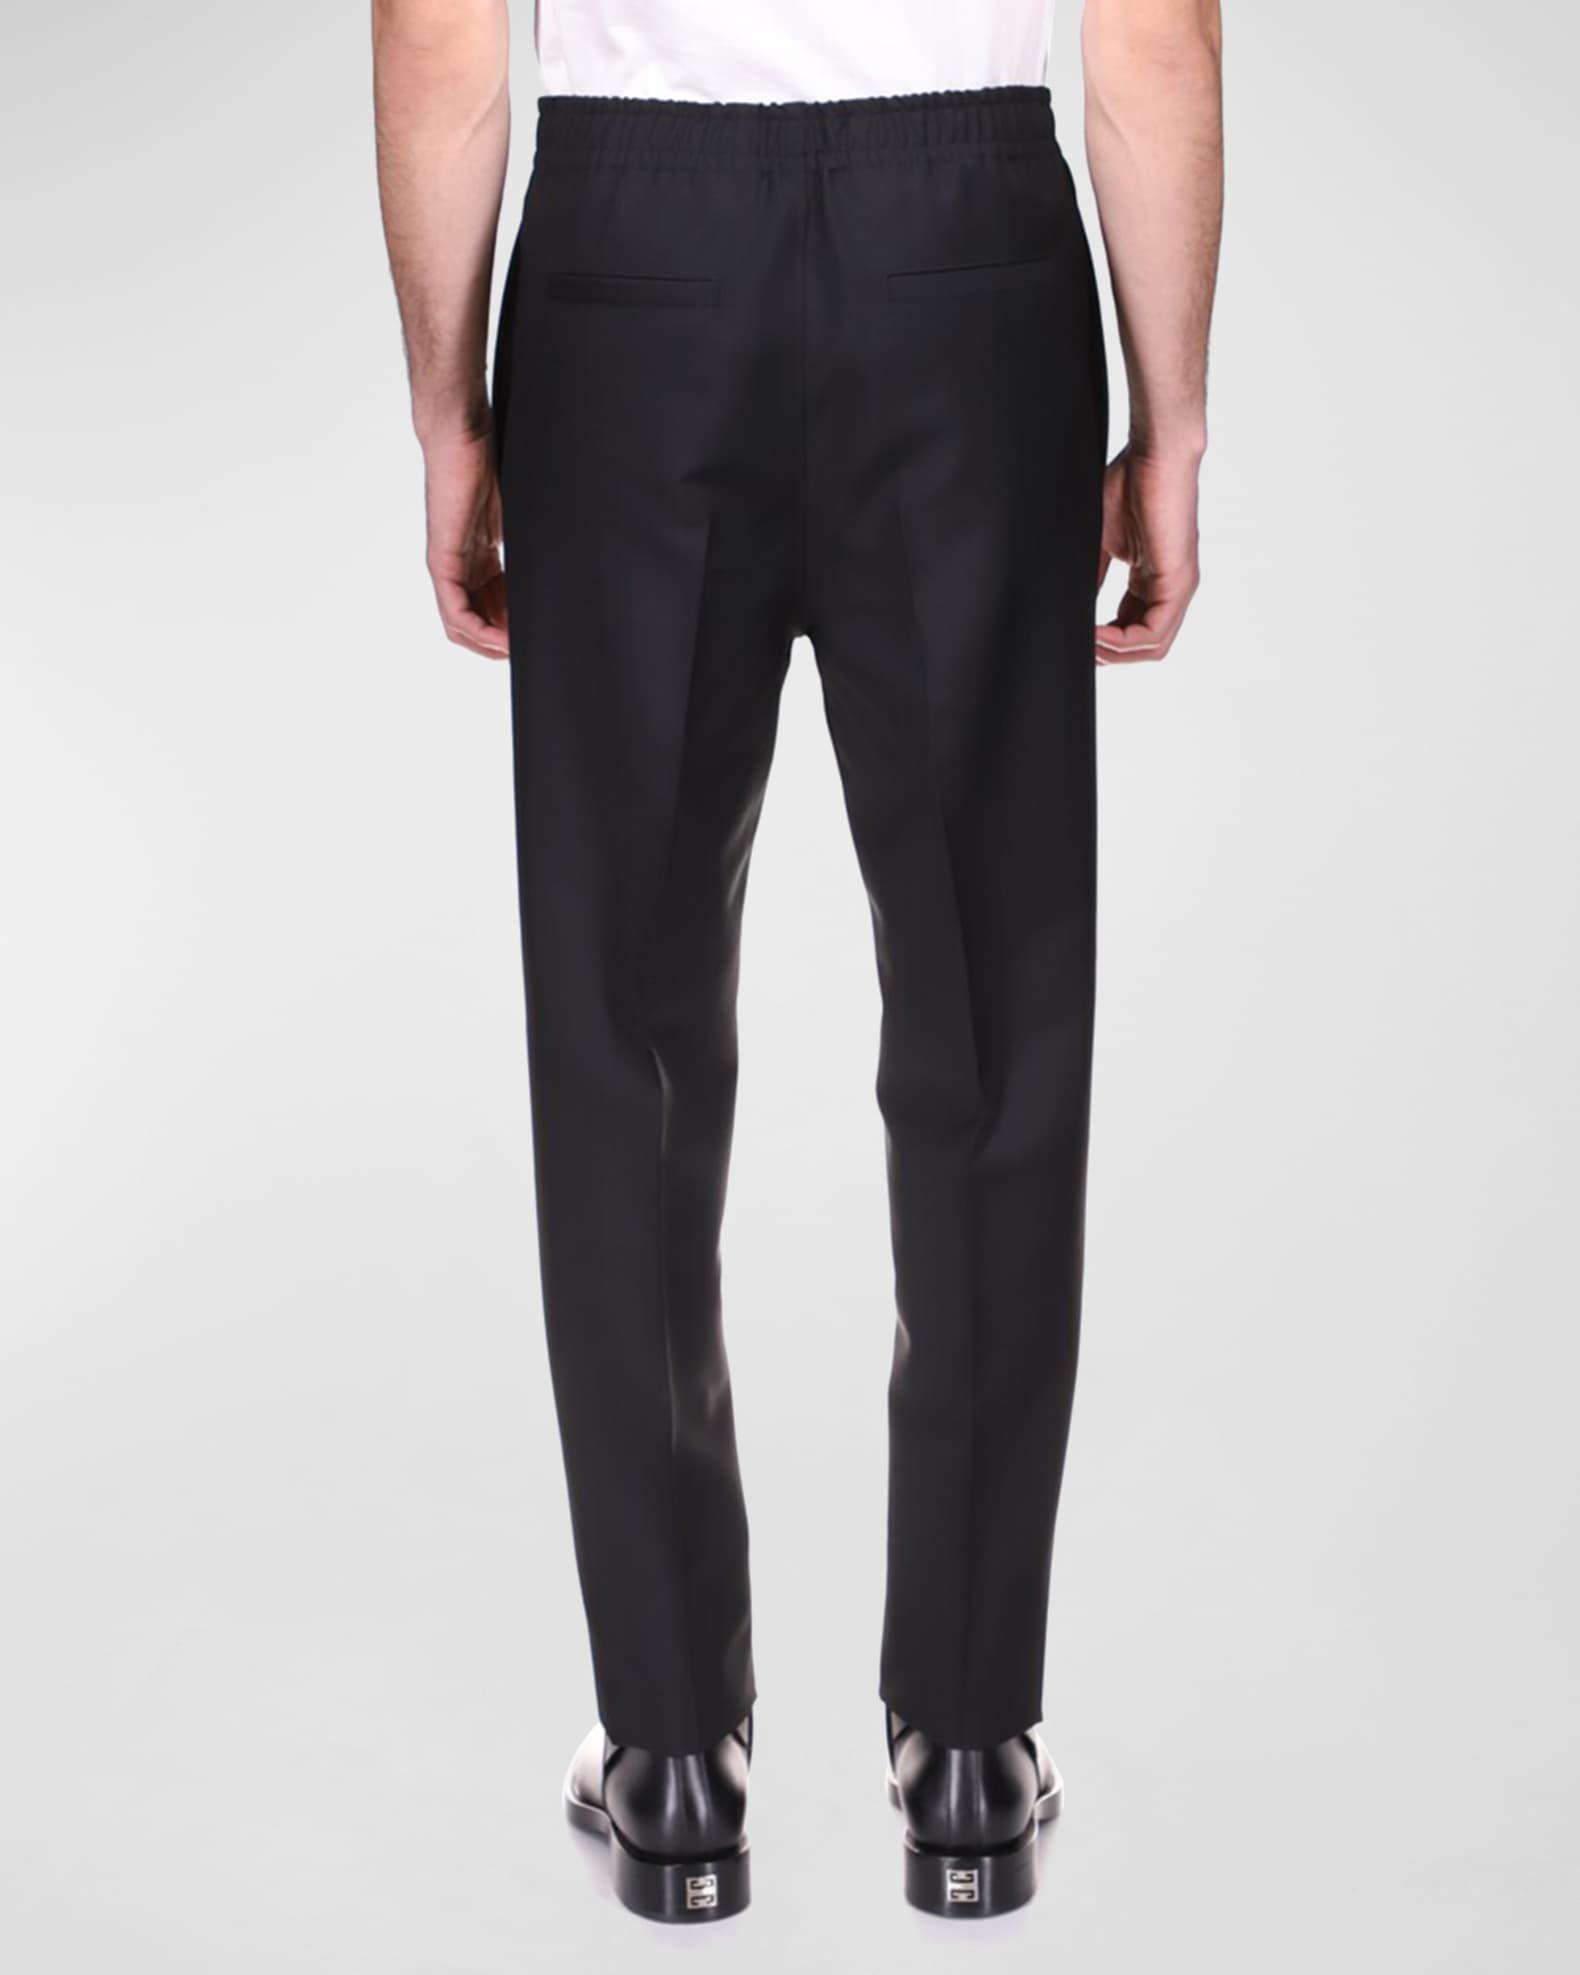 Givenchy Men's Solid Tapered Wool Trousers | Neiman Marcus